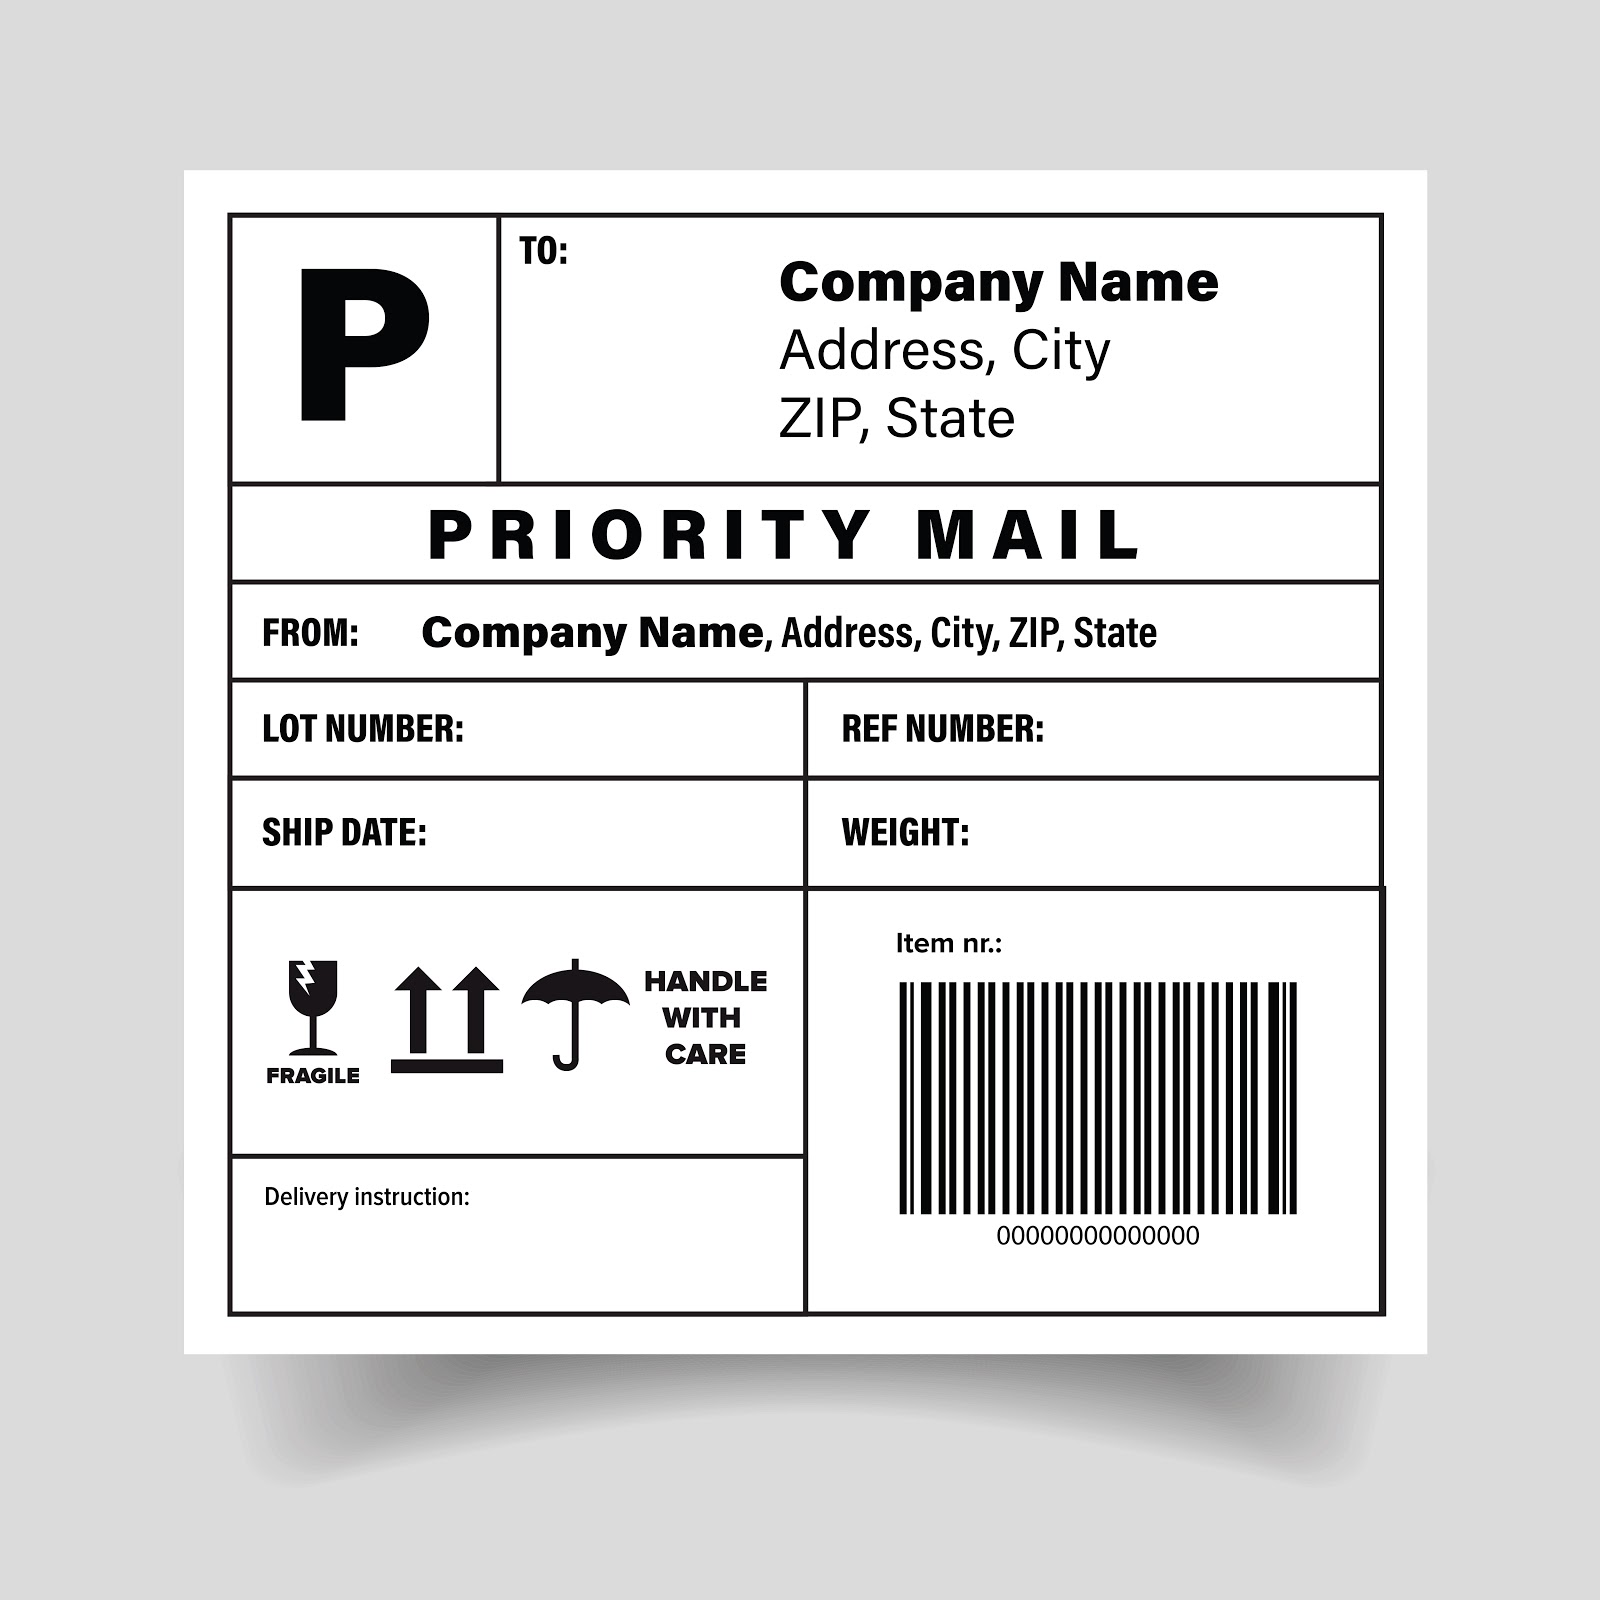 Your Shipping Label: A Complete Guide